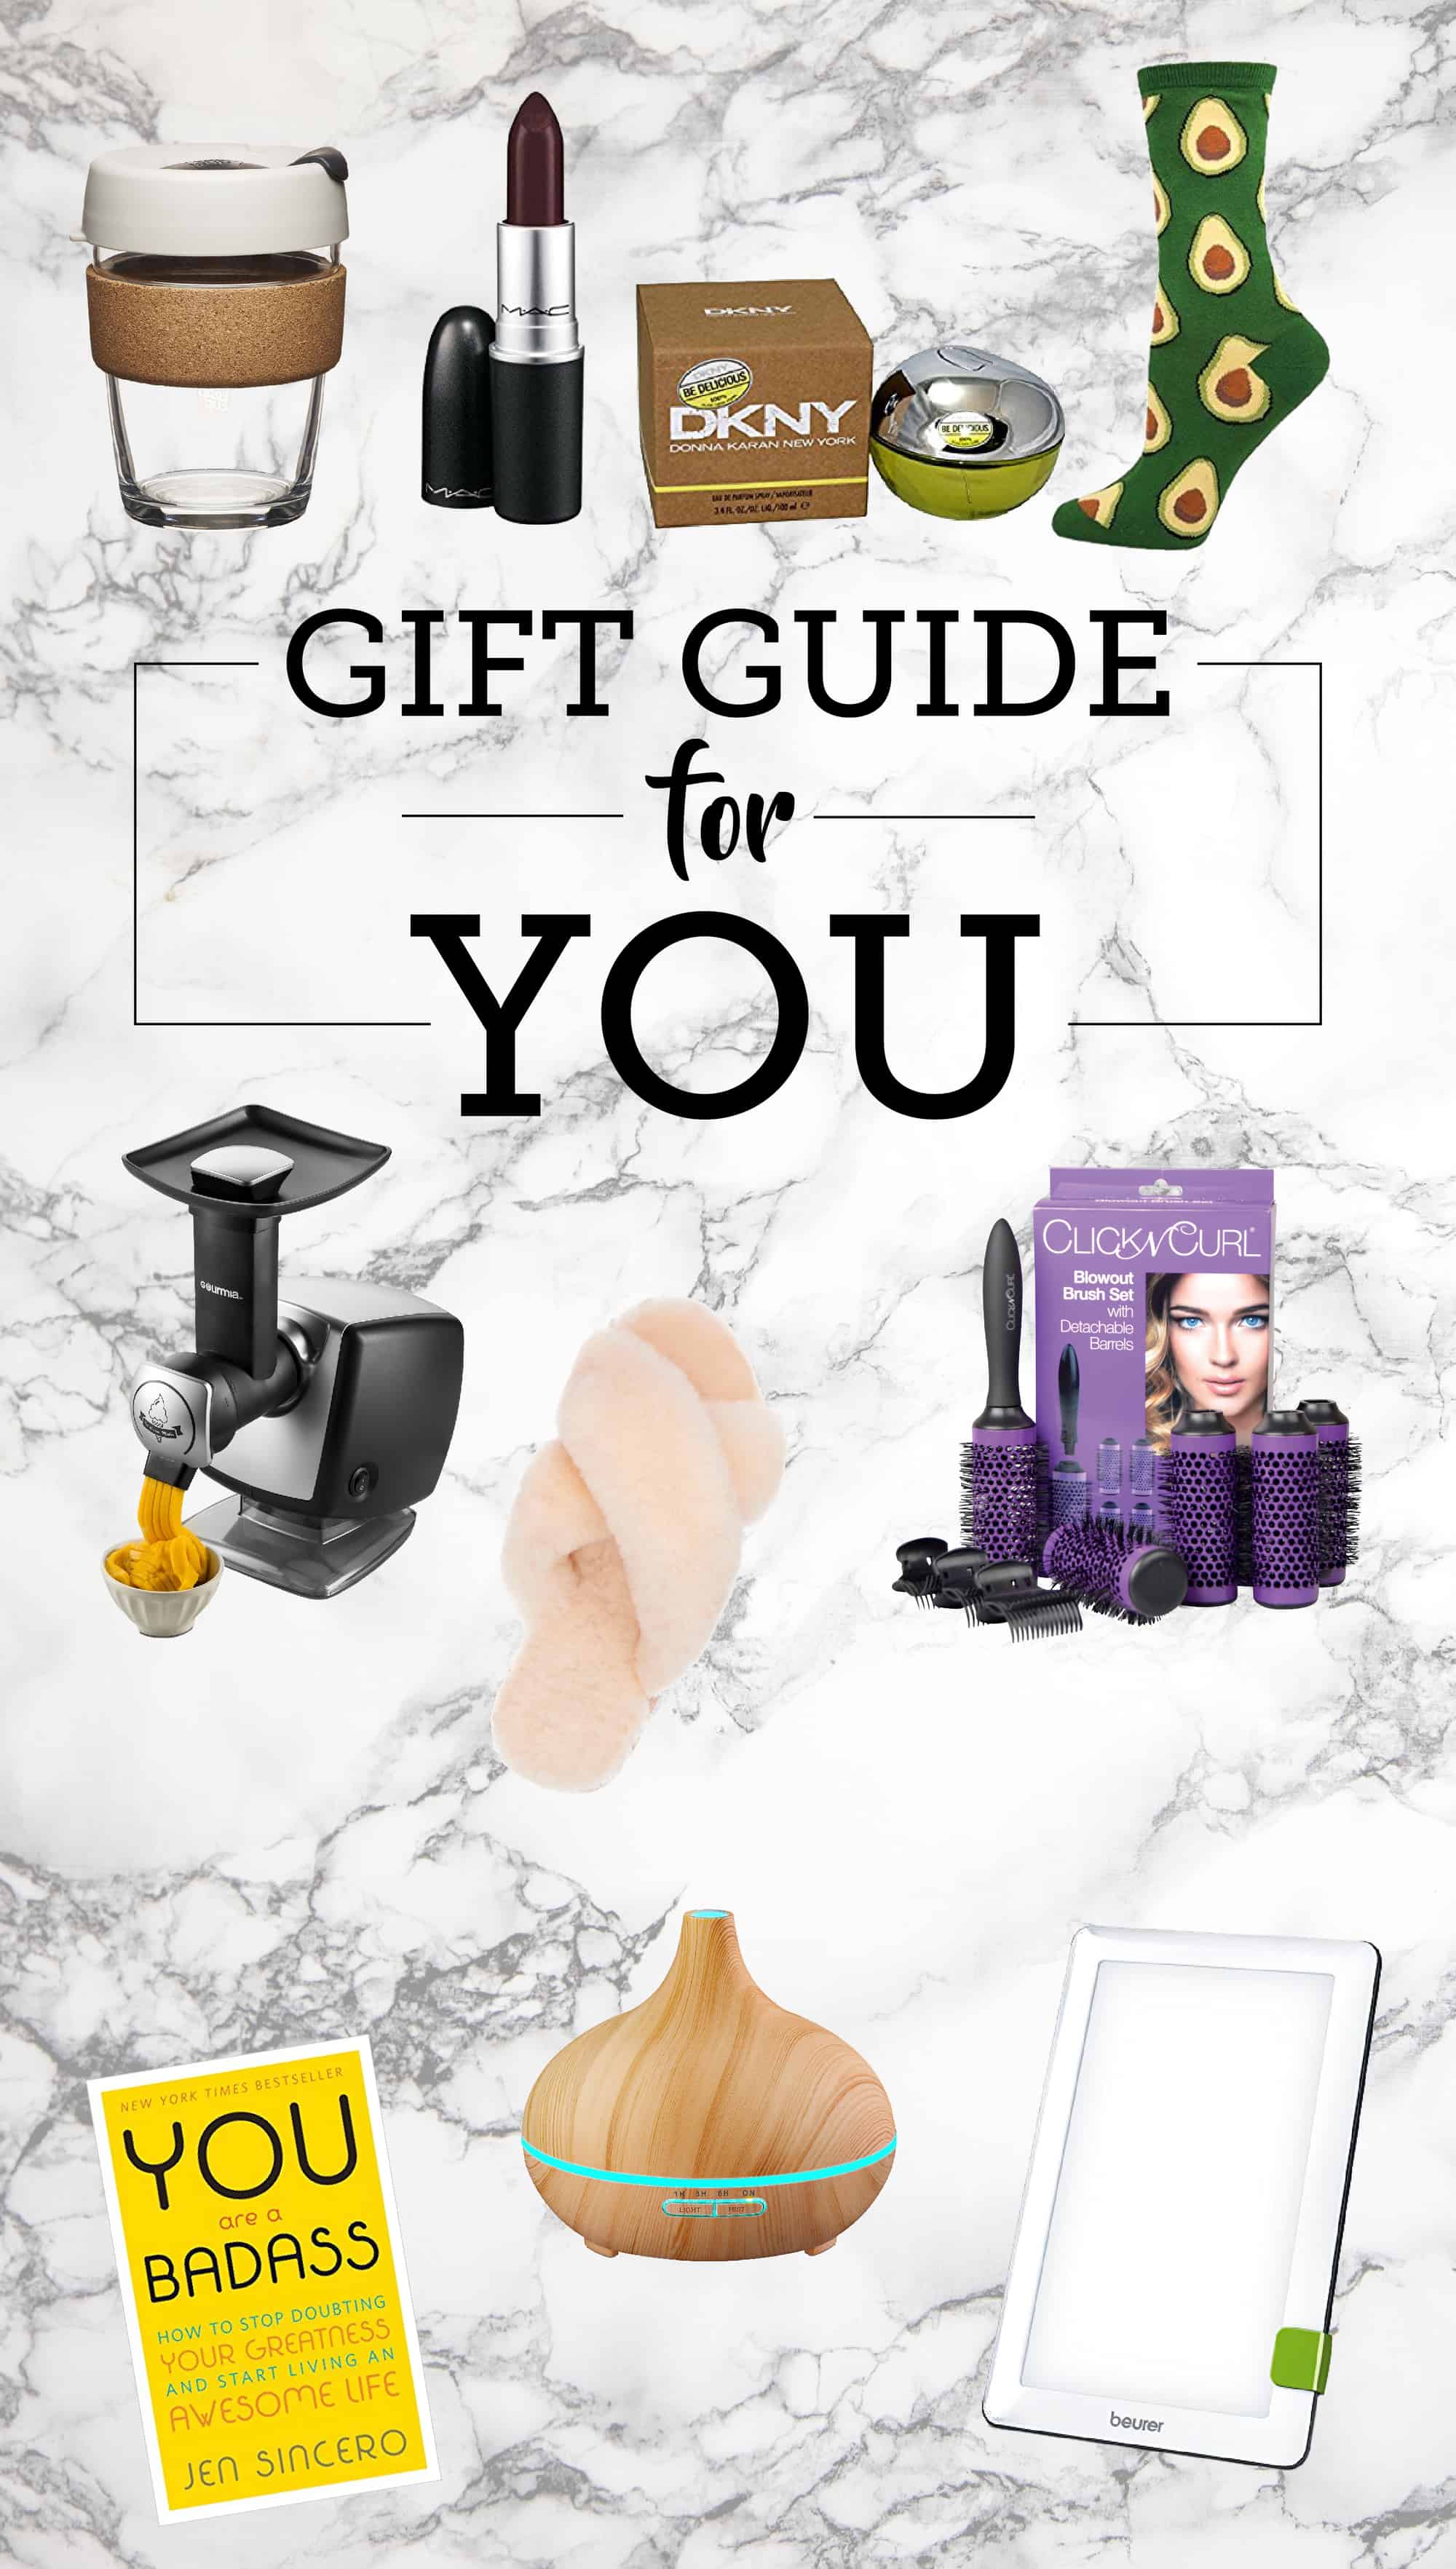 Graphic for "Gift Guide for YOU" Blog Post on Click n Curl Website